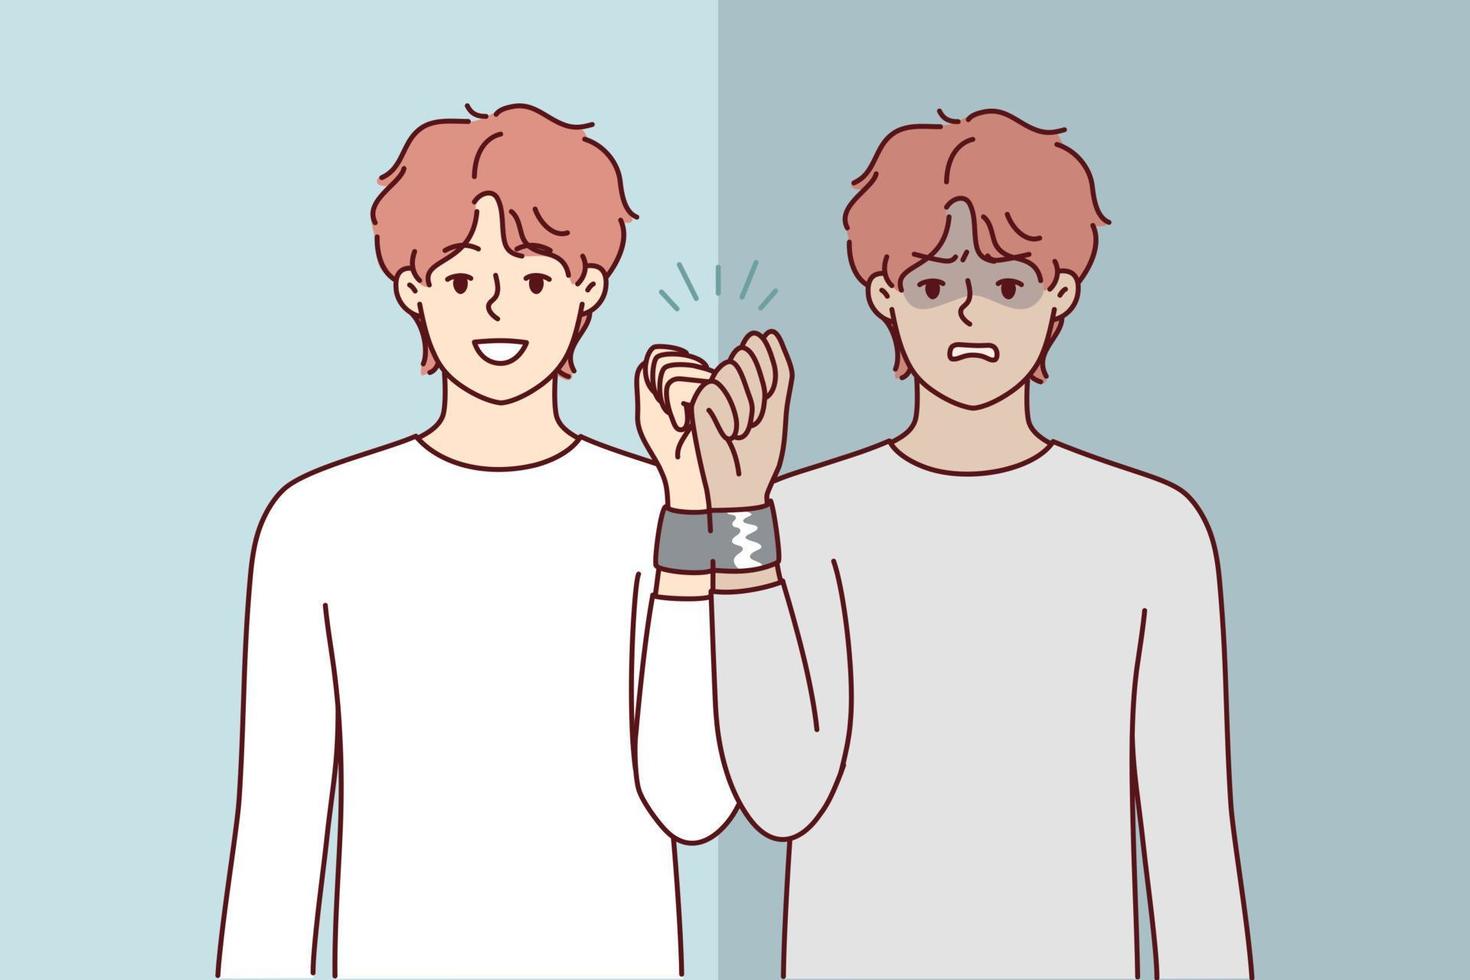 Similar men with tied hands for psychological problems concept. Cheerful and sad guy in reflection with adhesive tape on hand symbolizes internal personality disorder. Flat vector design